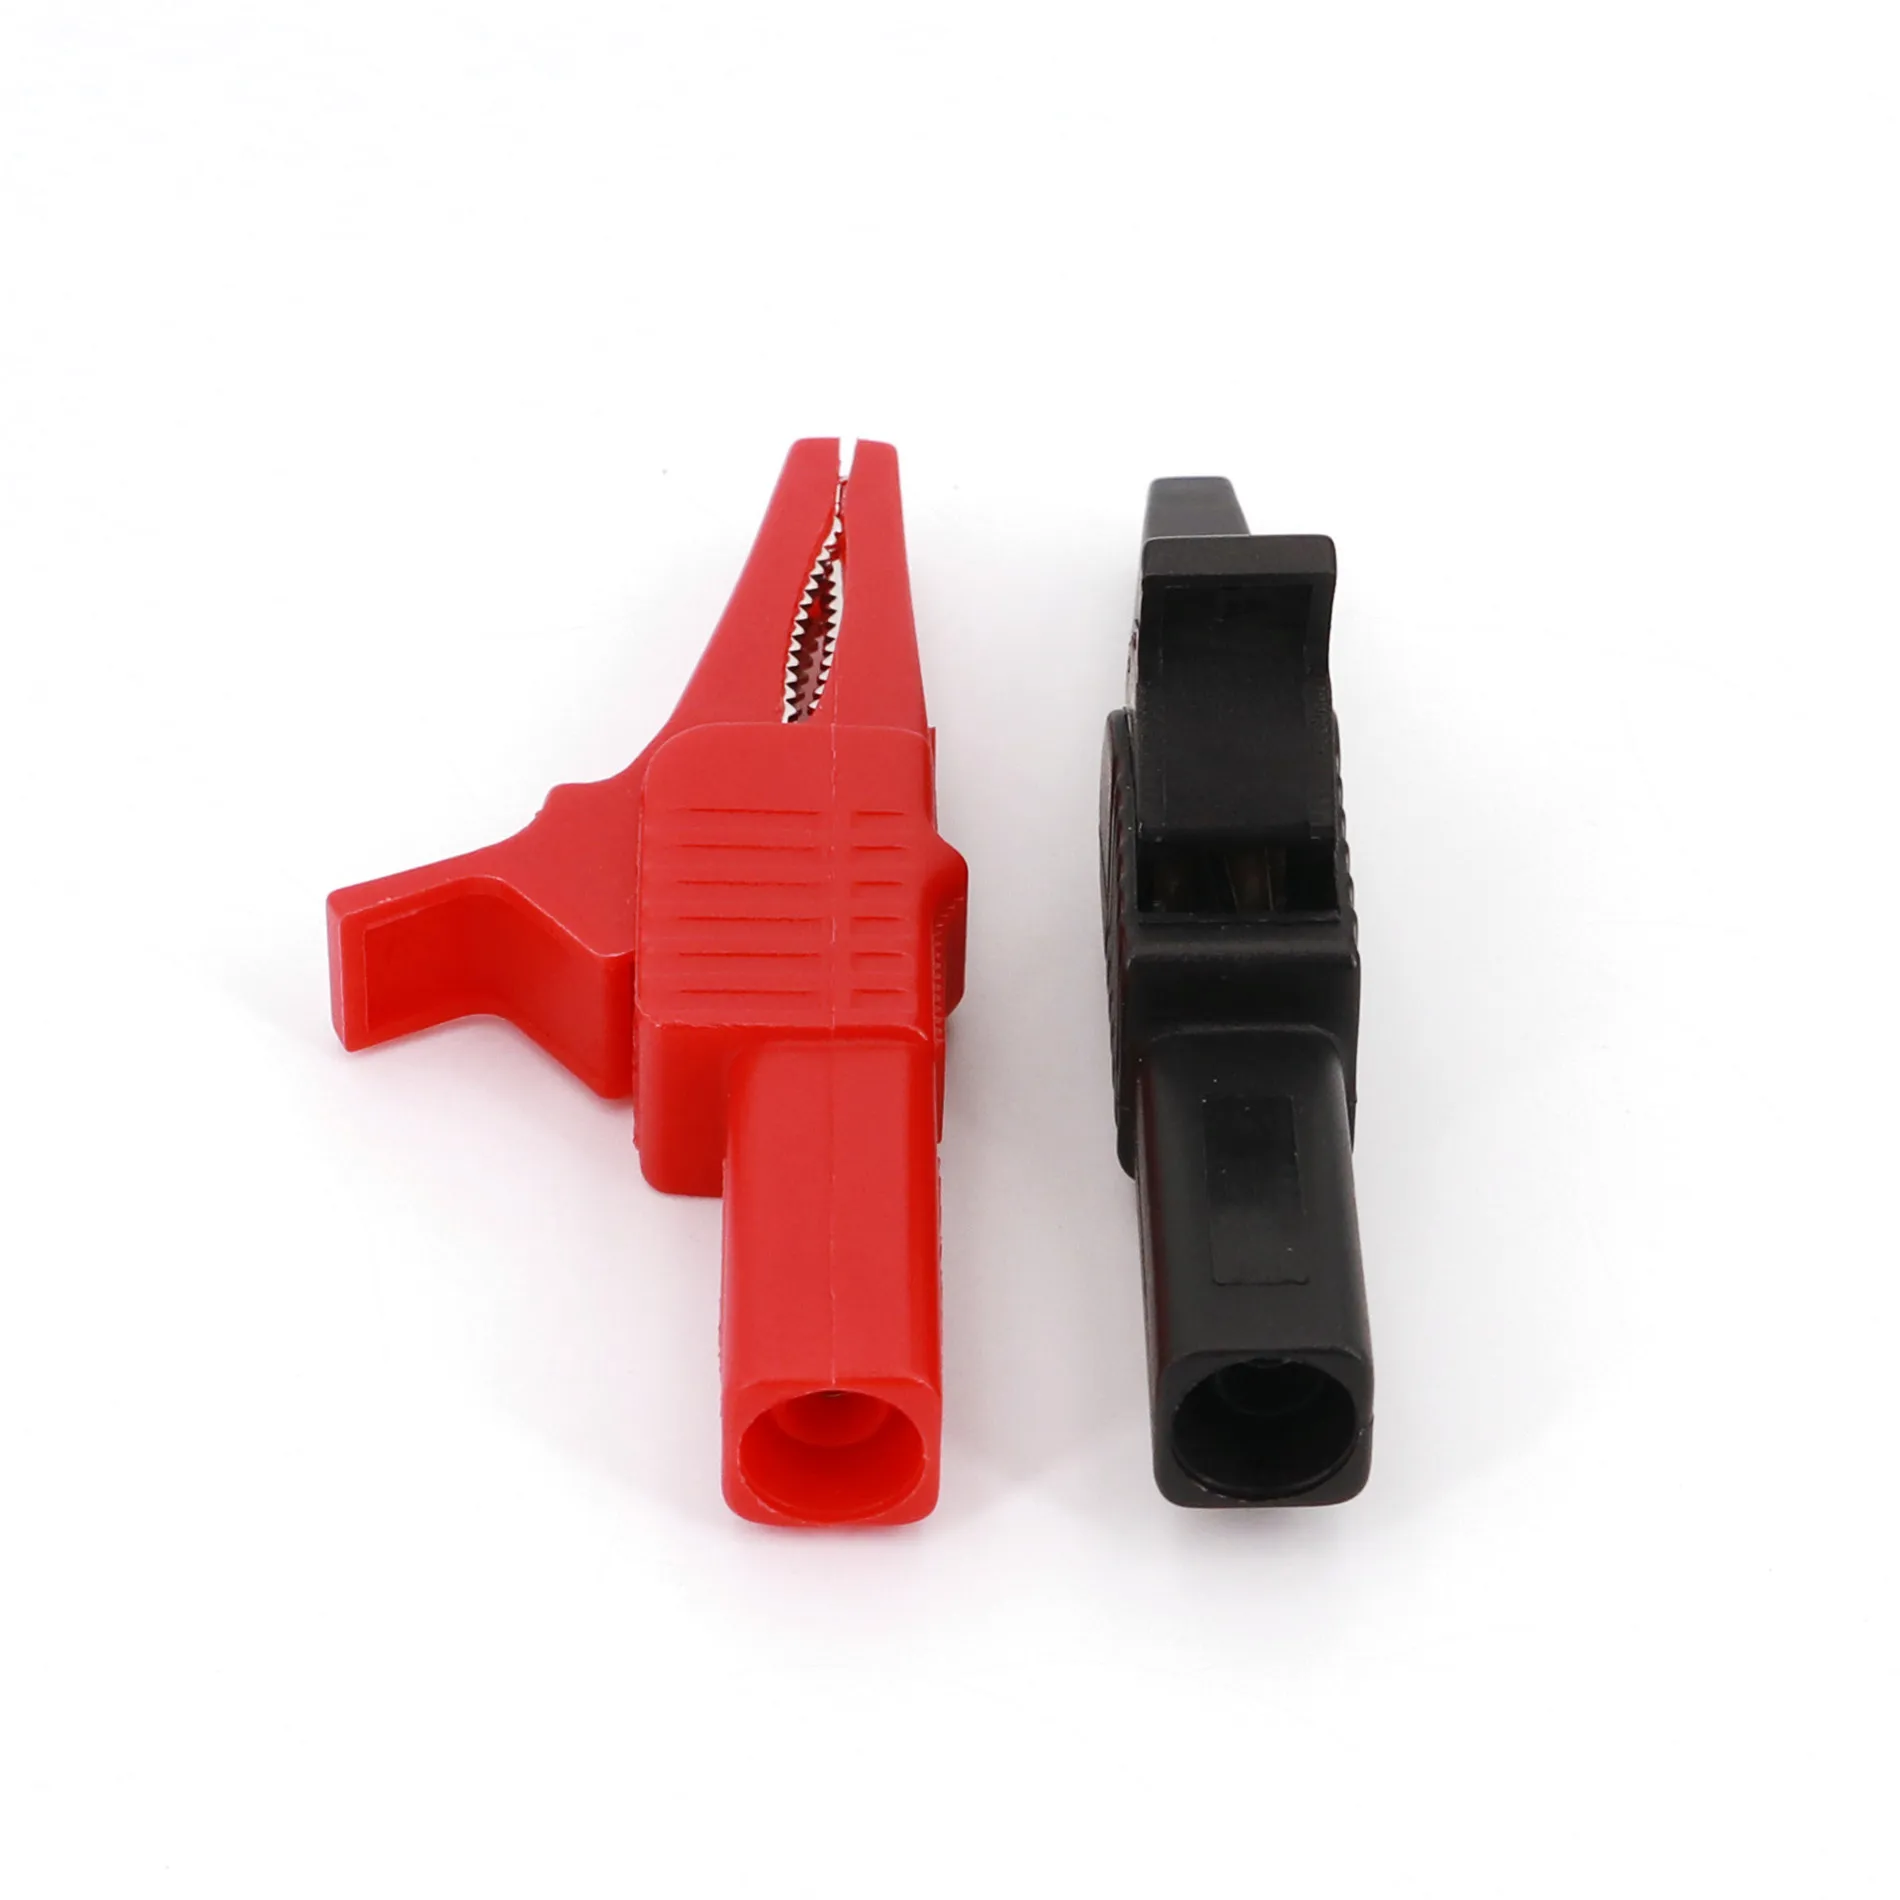 2 PIECE SET OF CROCODILE CLIPS 1000v RED BLACK WIDE OPENING JAWS 4mm BANANA PLUG 